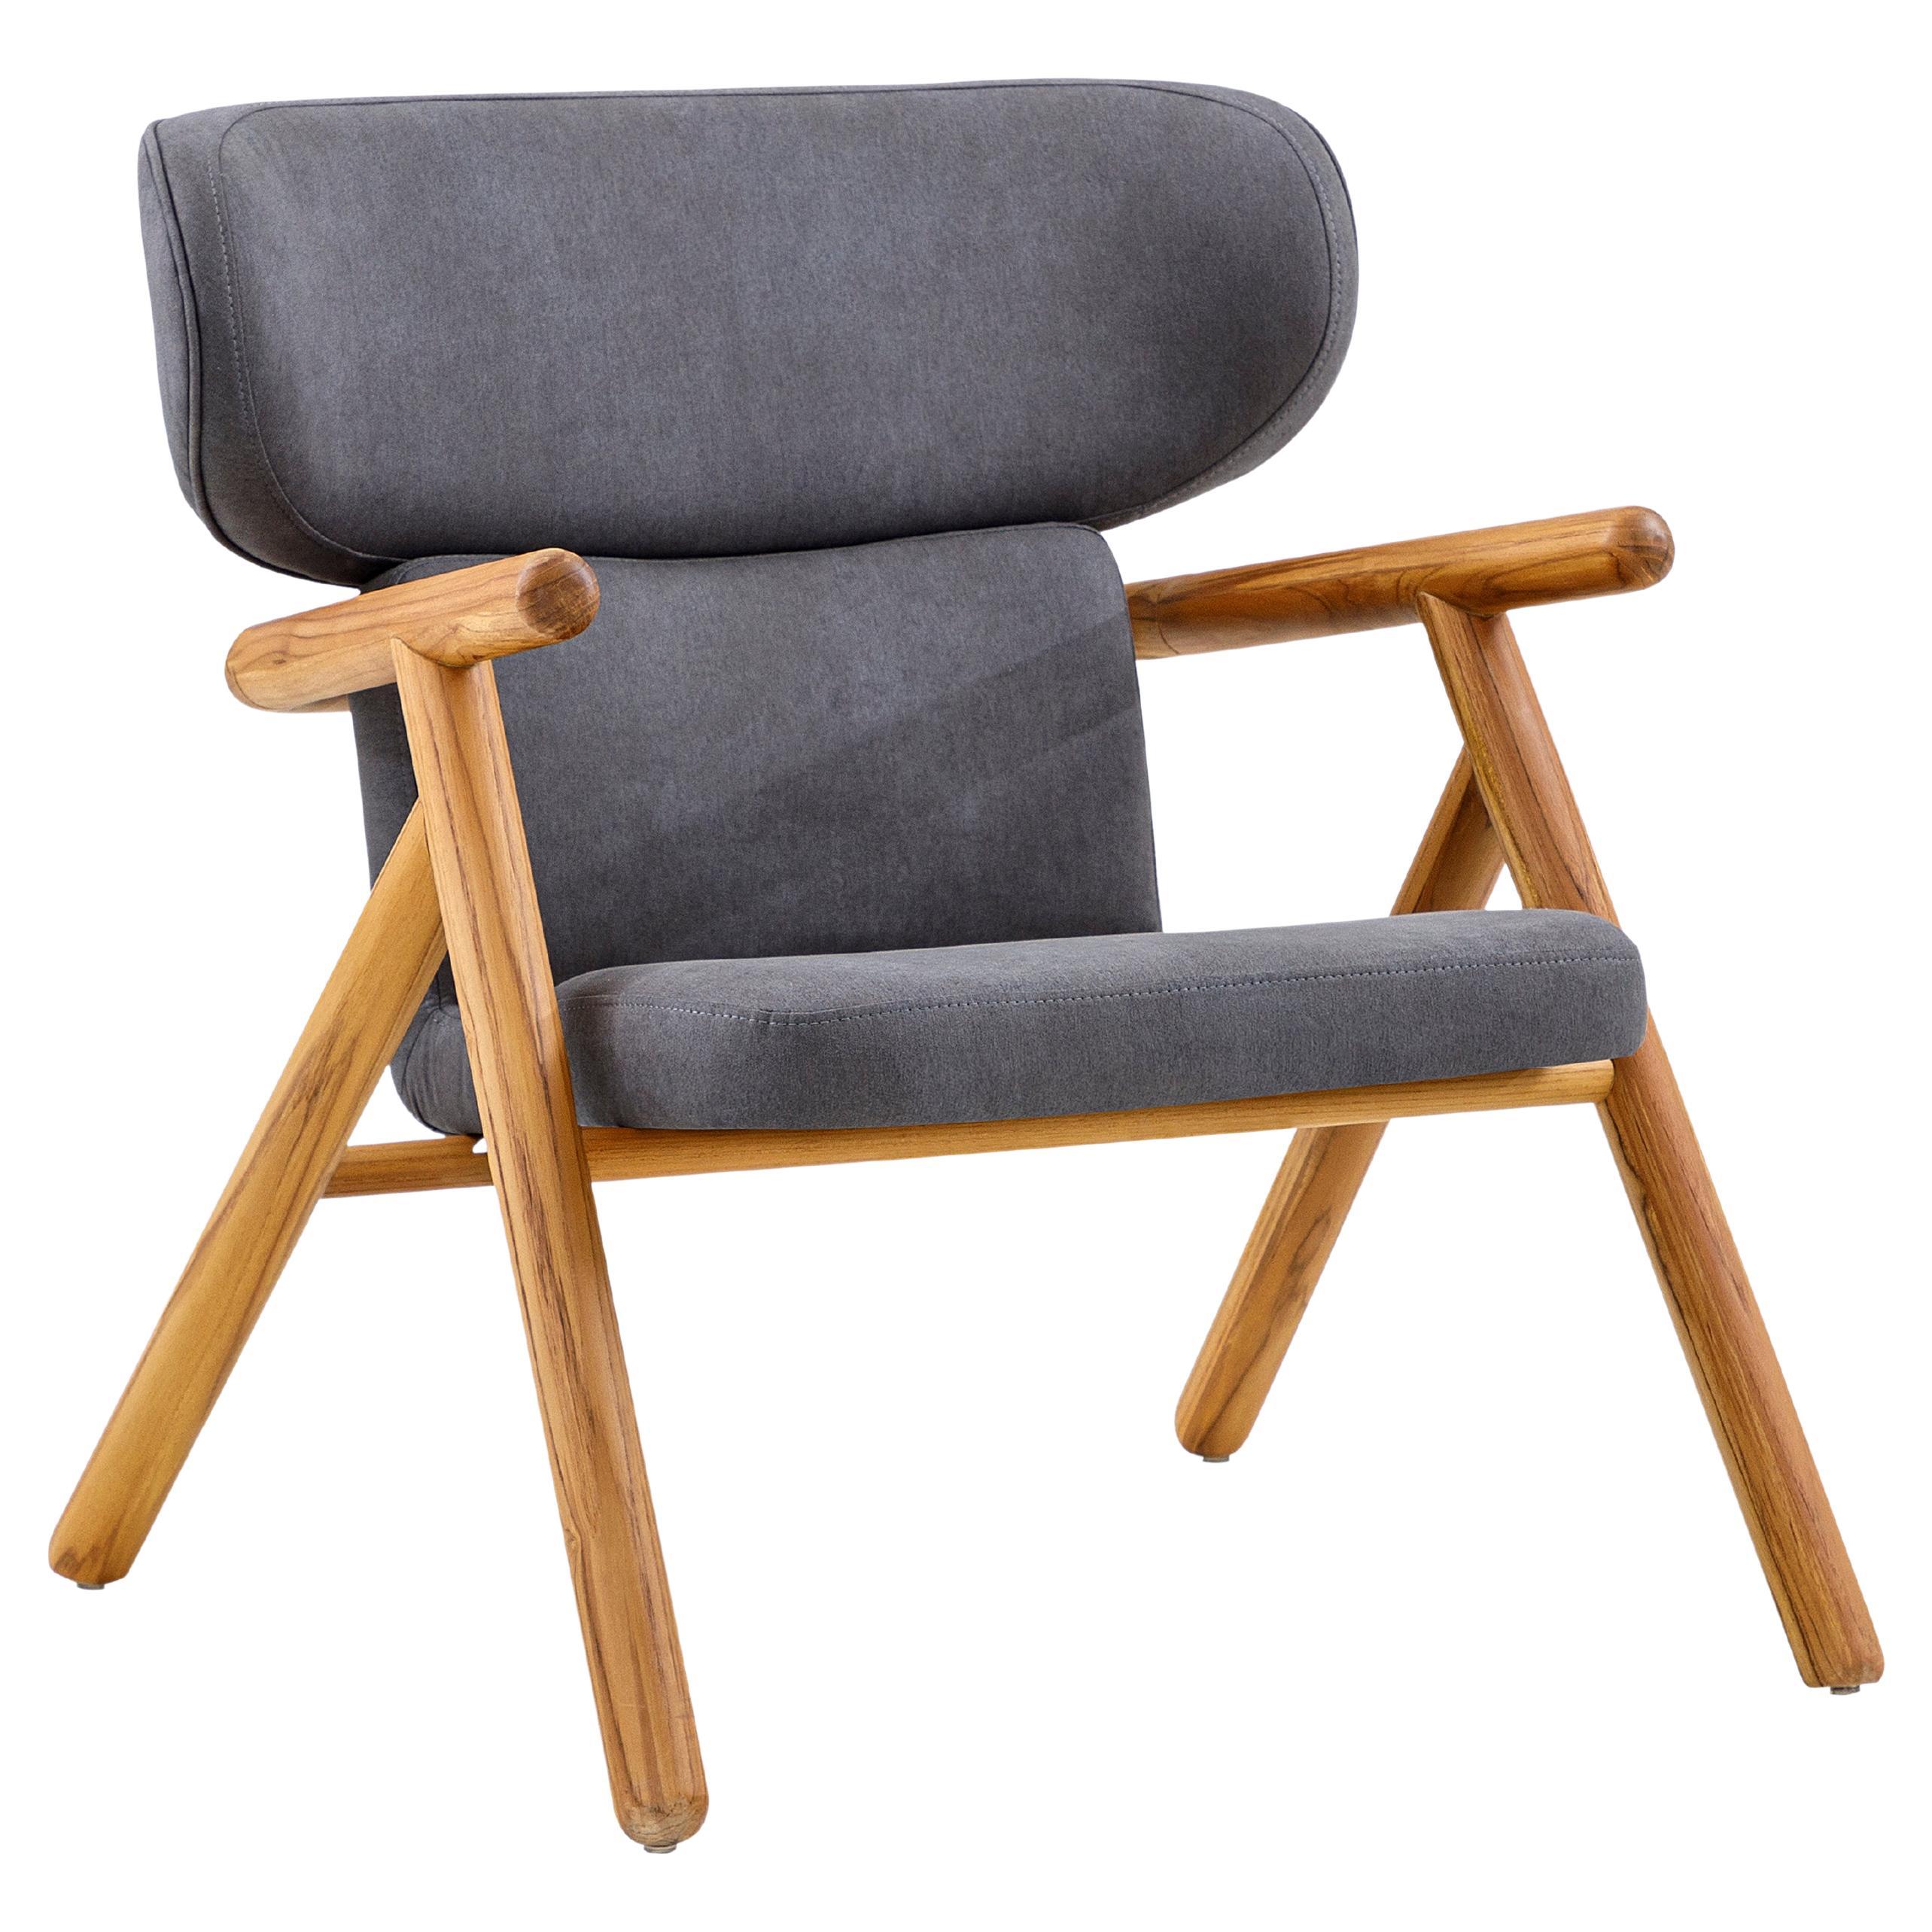 Sole Scandinavian-Styled Armchair in Teak Wood Finish and Charcoal Fabric For Sale